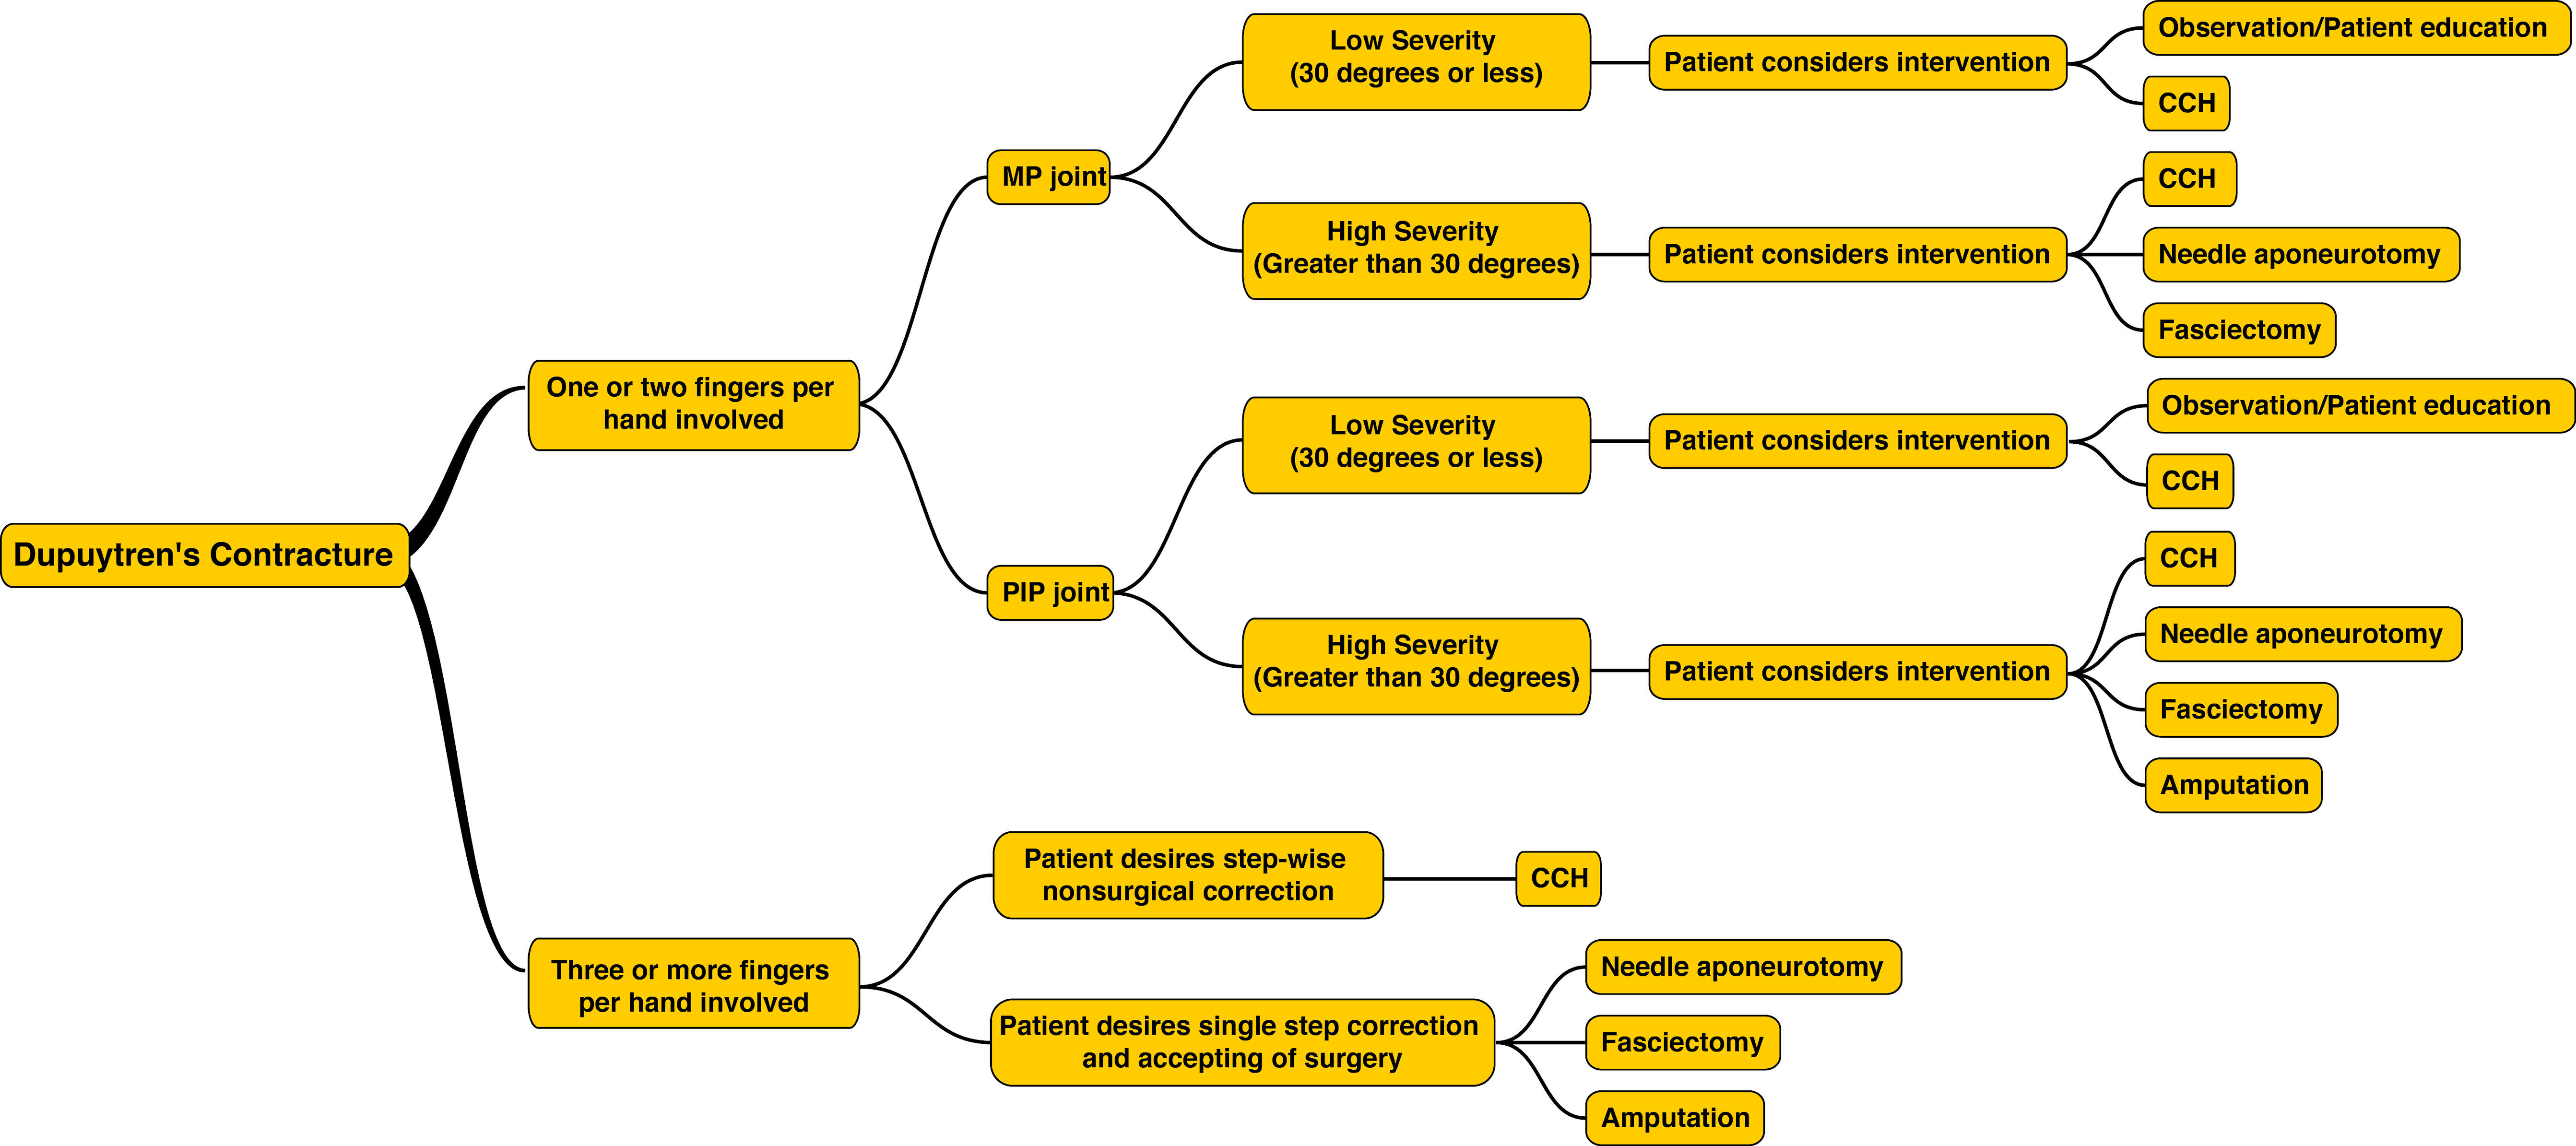 Figure 14: Flowchart for managing patients with Dupuytren’s Disease from initial presentation to treatment